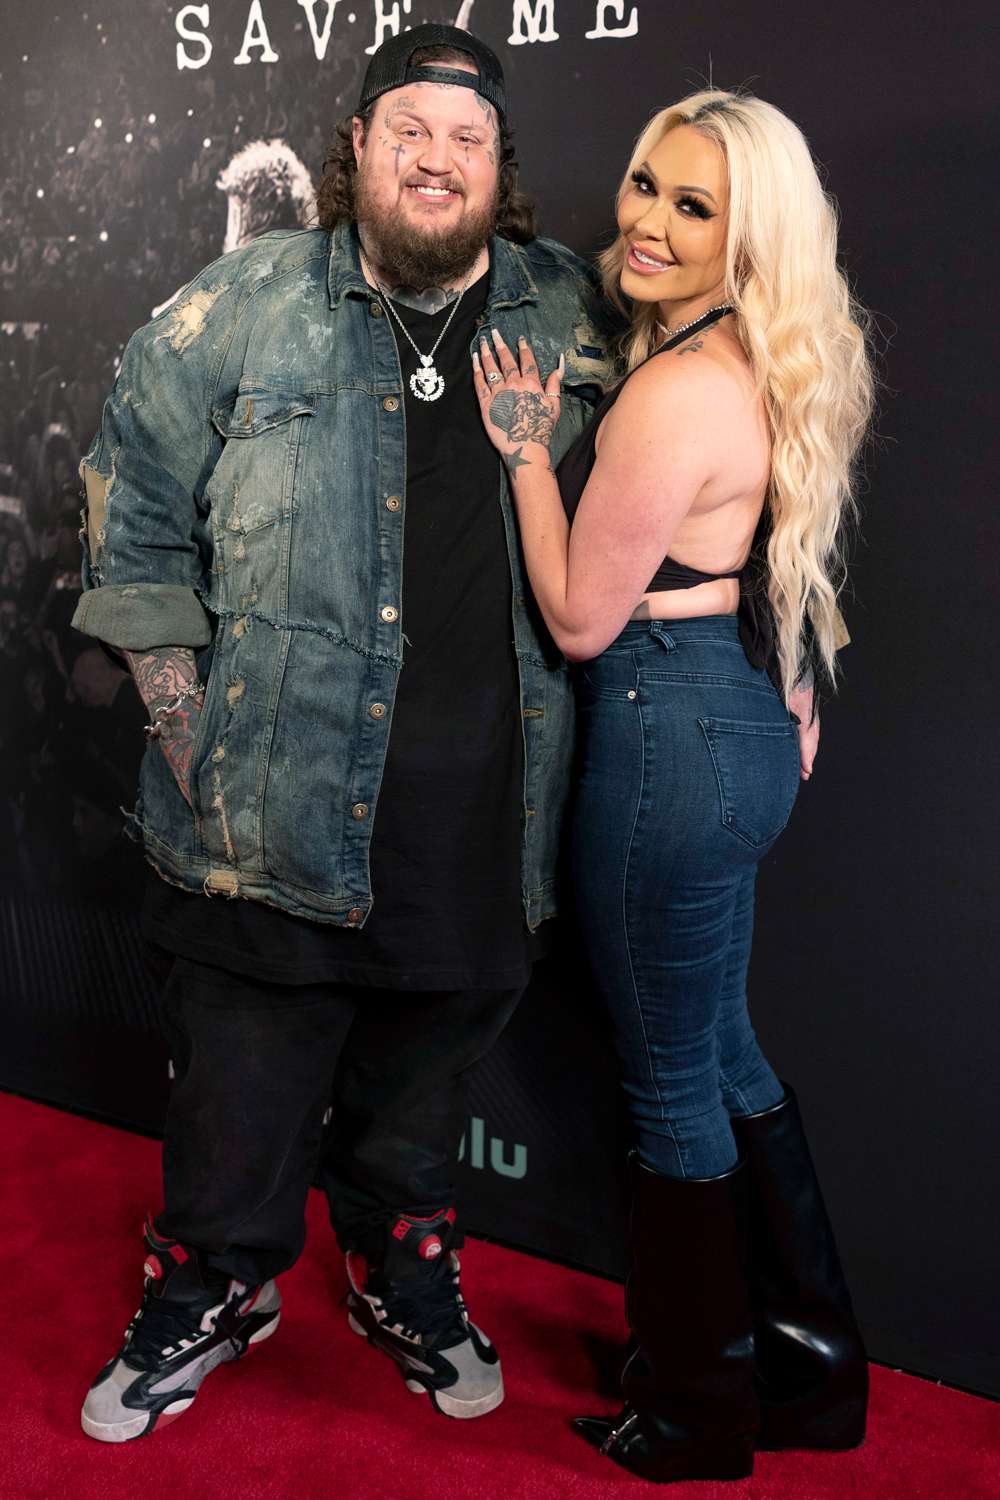 Jelly Roll and Bunnie Xo attend the "Jelly Roll: Save Me" Documentary World Premiere at the Ryman Auditorium on May 30, 2023